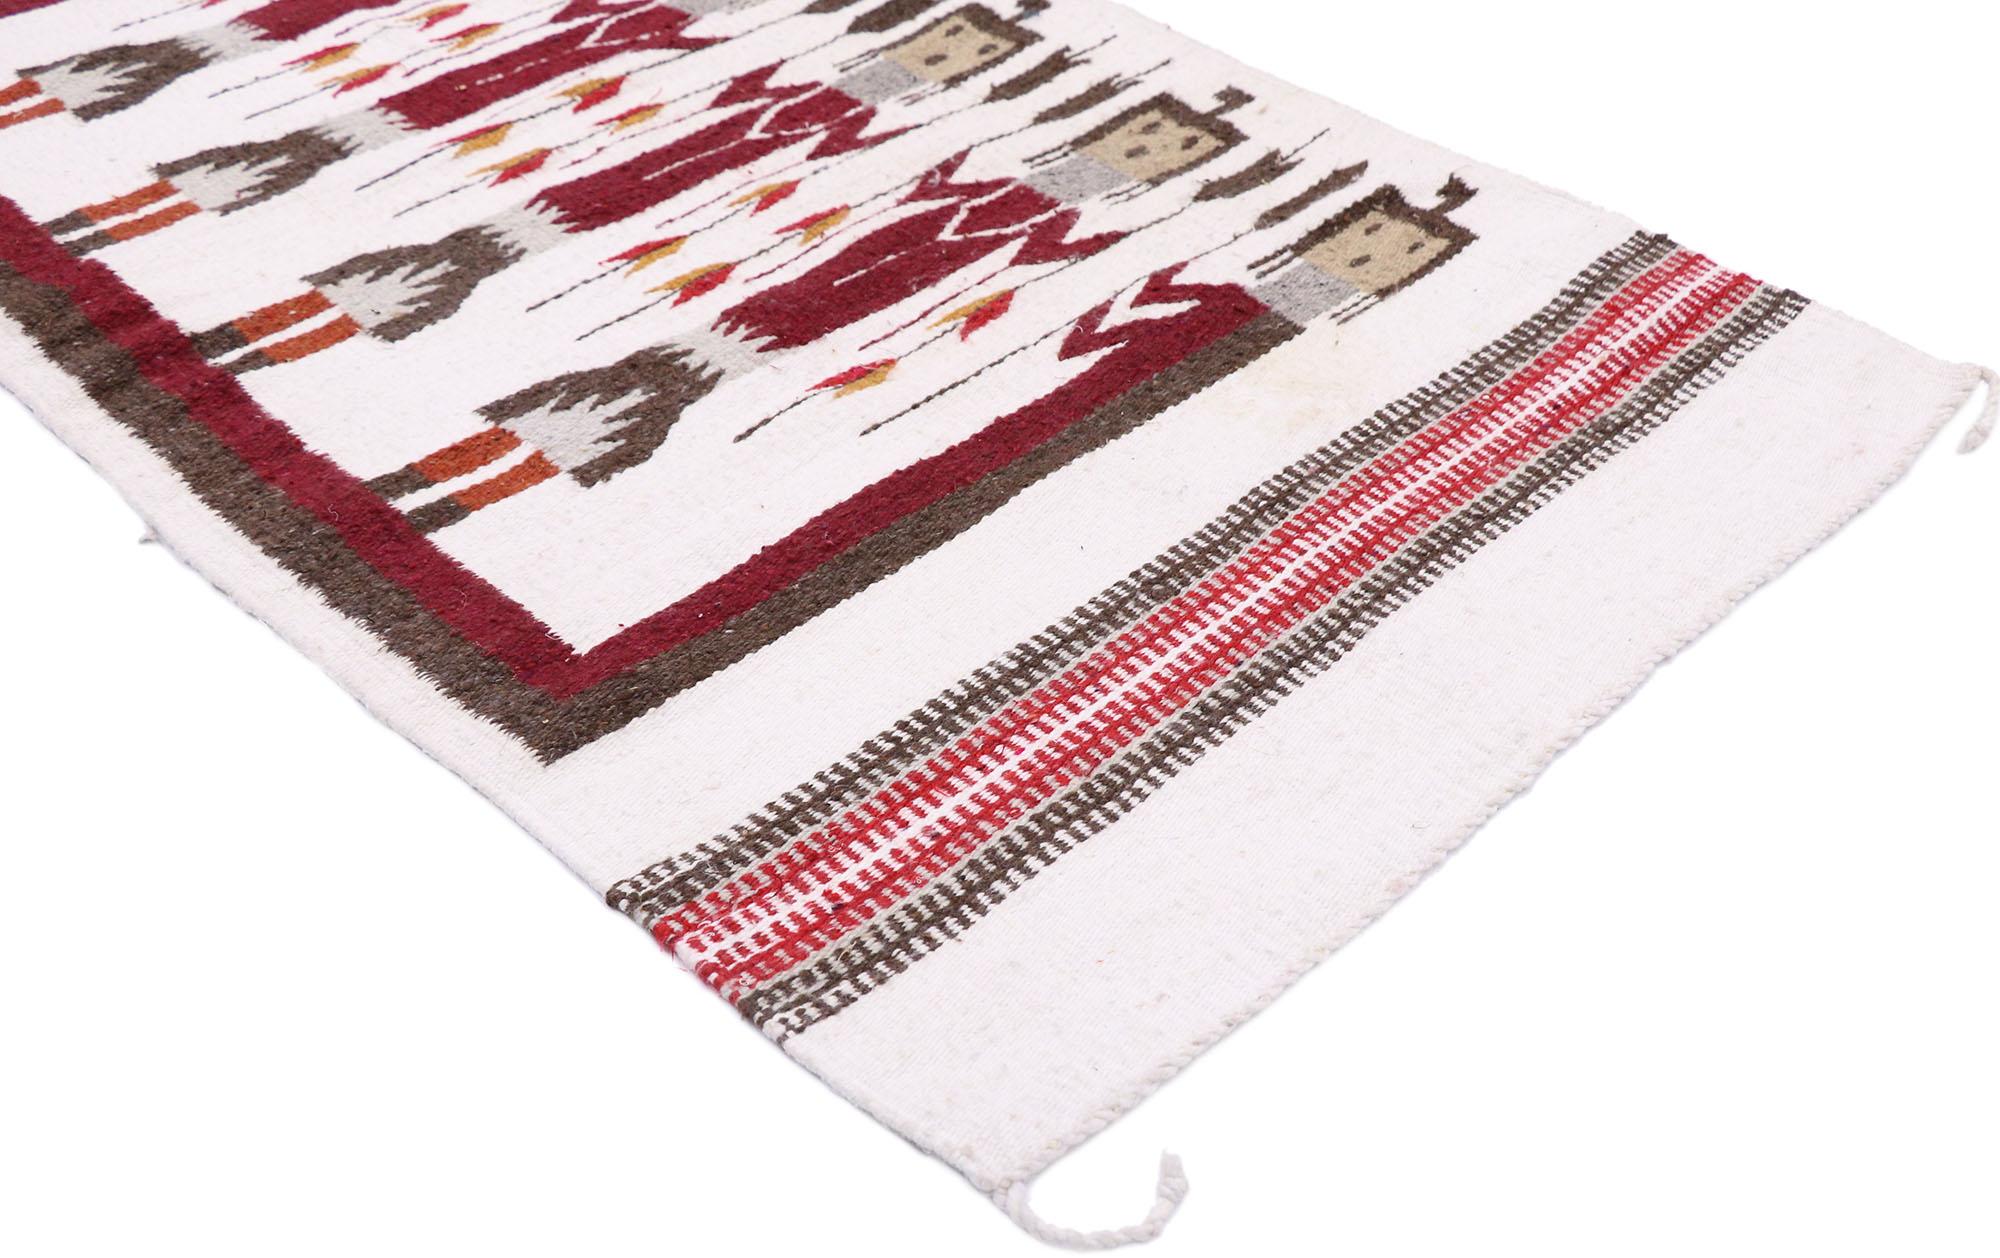 77771 Vintage Navajo Kilim Yeibichai rug with Southwestern Folk Art Style 02'07 x 05'03. Full of tiny details and a bold expressive design combined with neutral colors and tribal style, this hand-woven wool vintage Navajo kilim Yeibichai rug is a